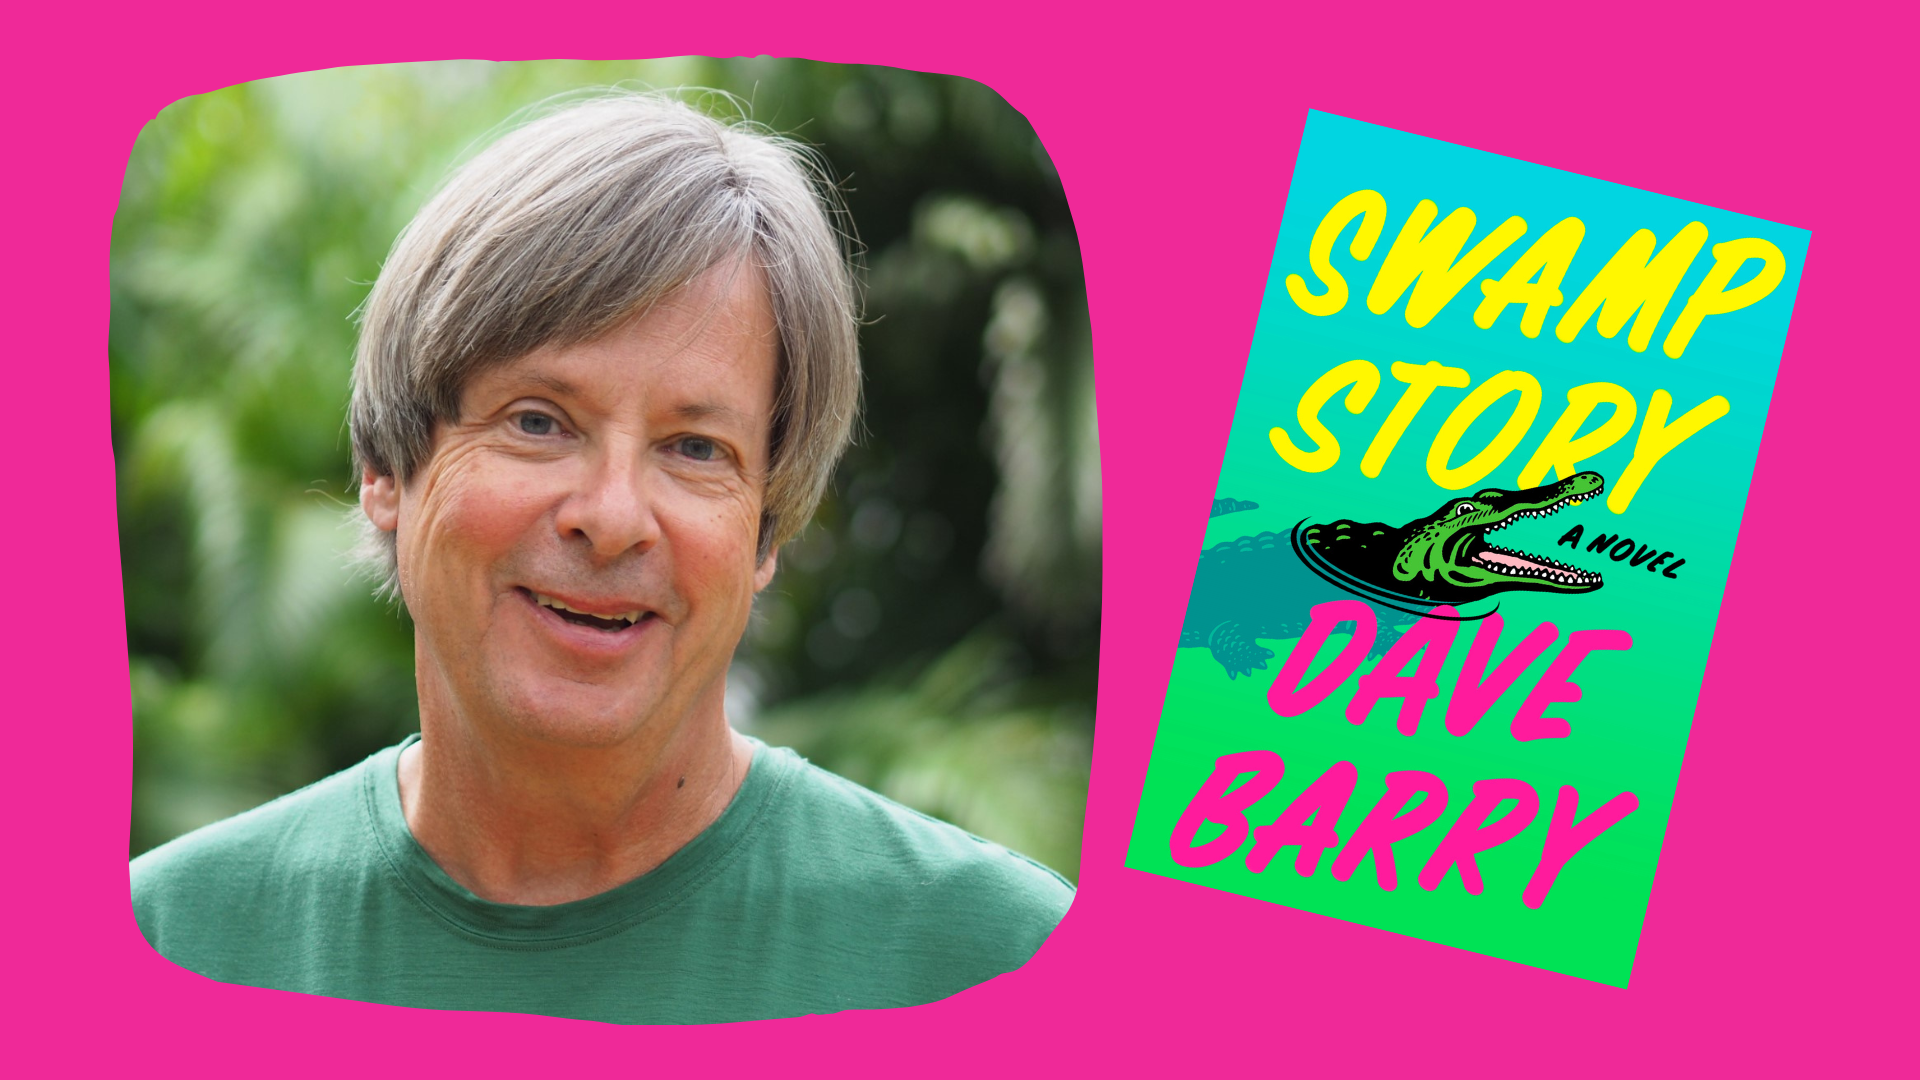 Dave Barry will discuss his new book, "Swamp Stories," at a free event at Broward County's Main Library on June 16th.